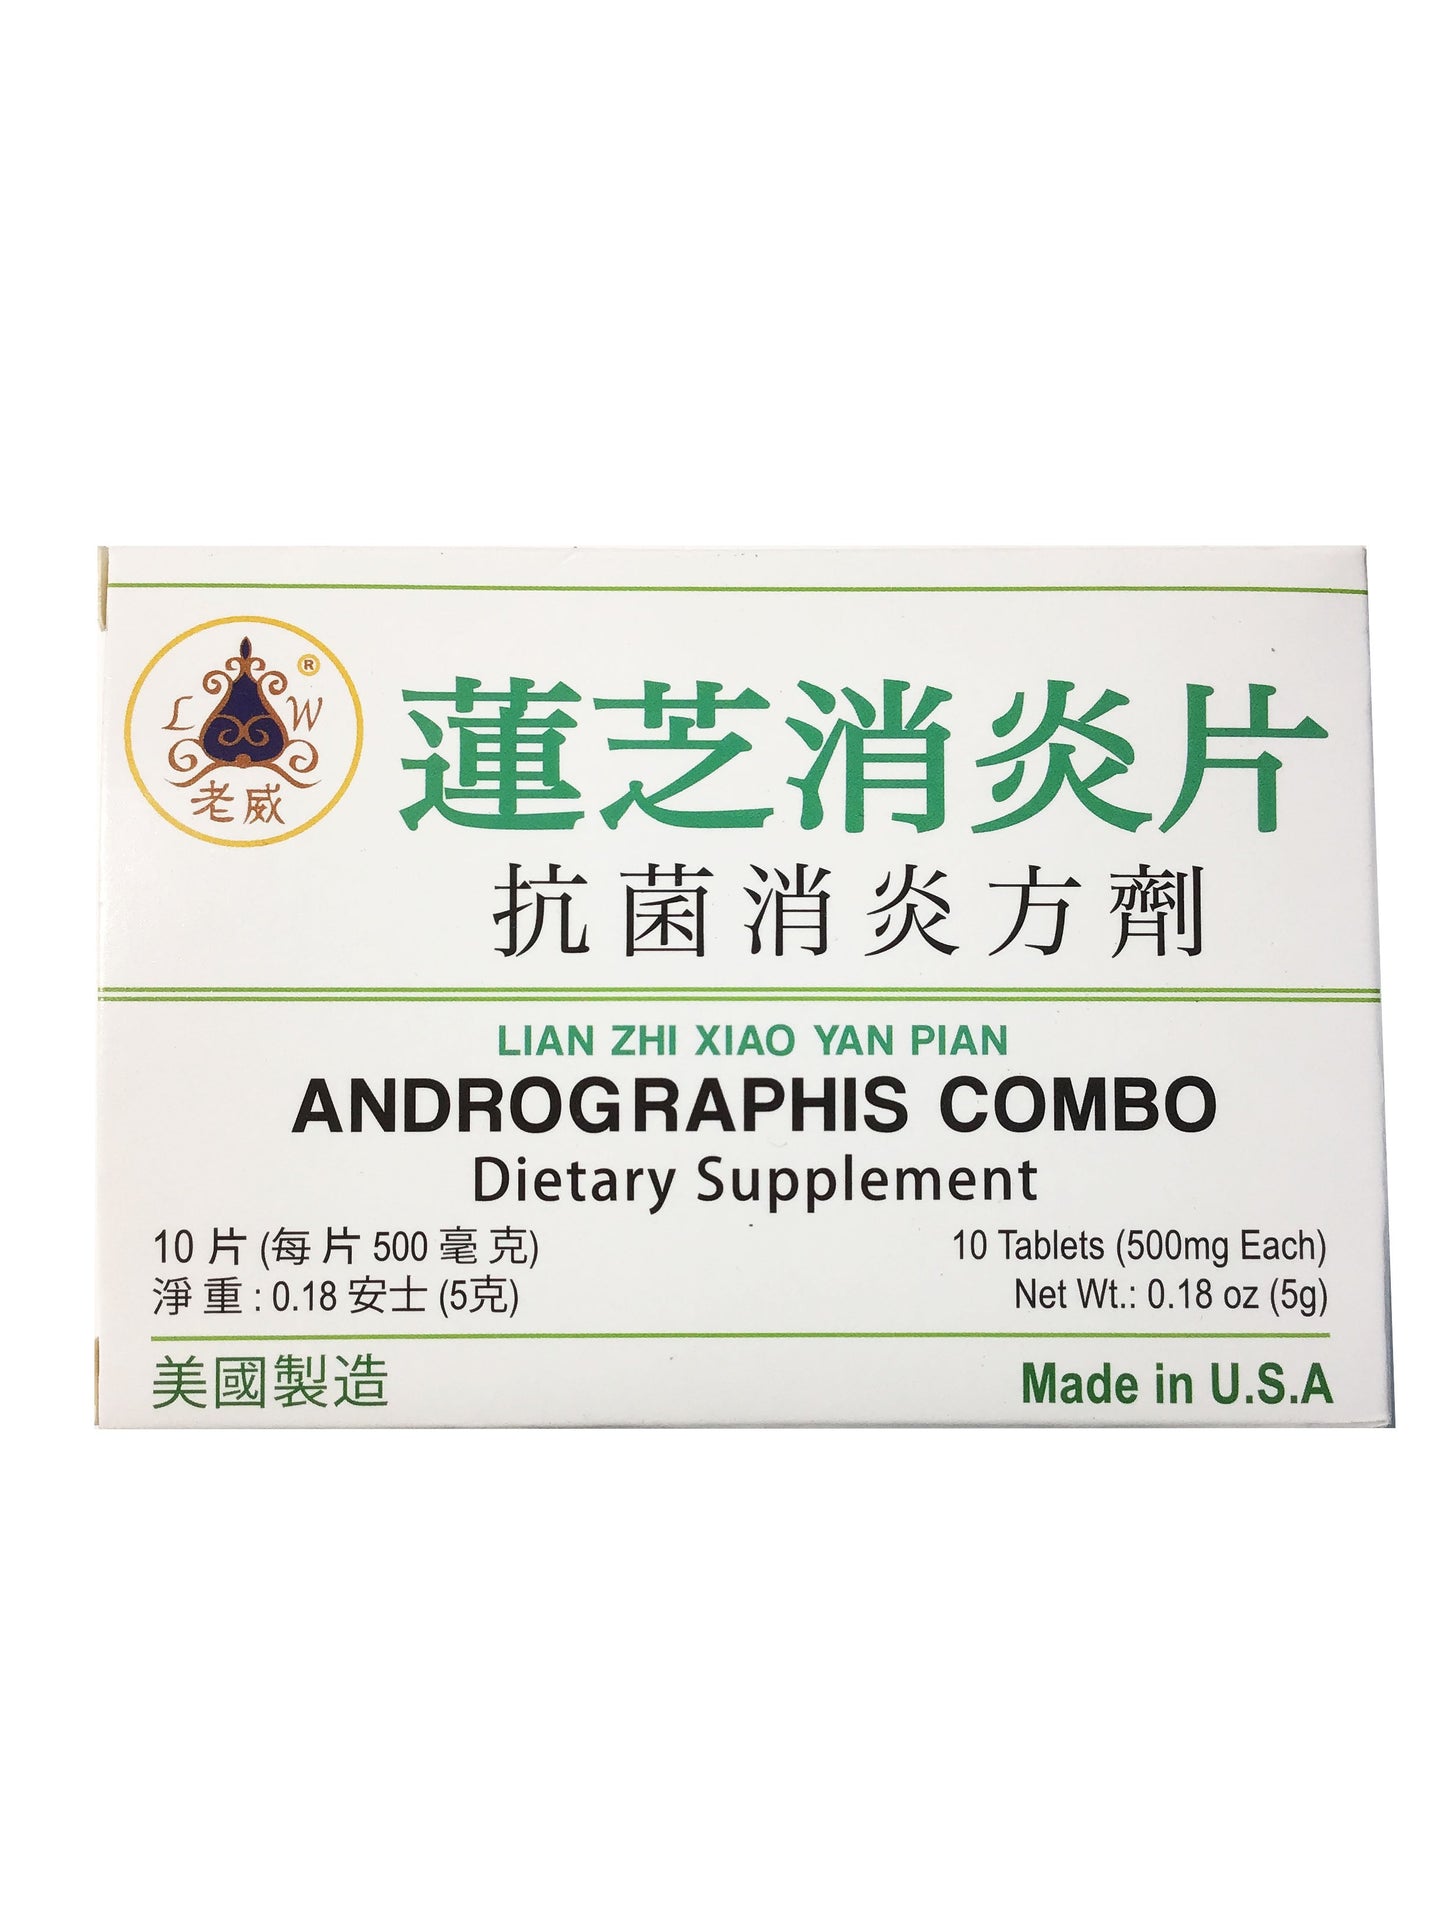 Andrographis Combo Dietary Supplement 老威 蓮芝消炎片 10 Tablets